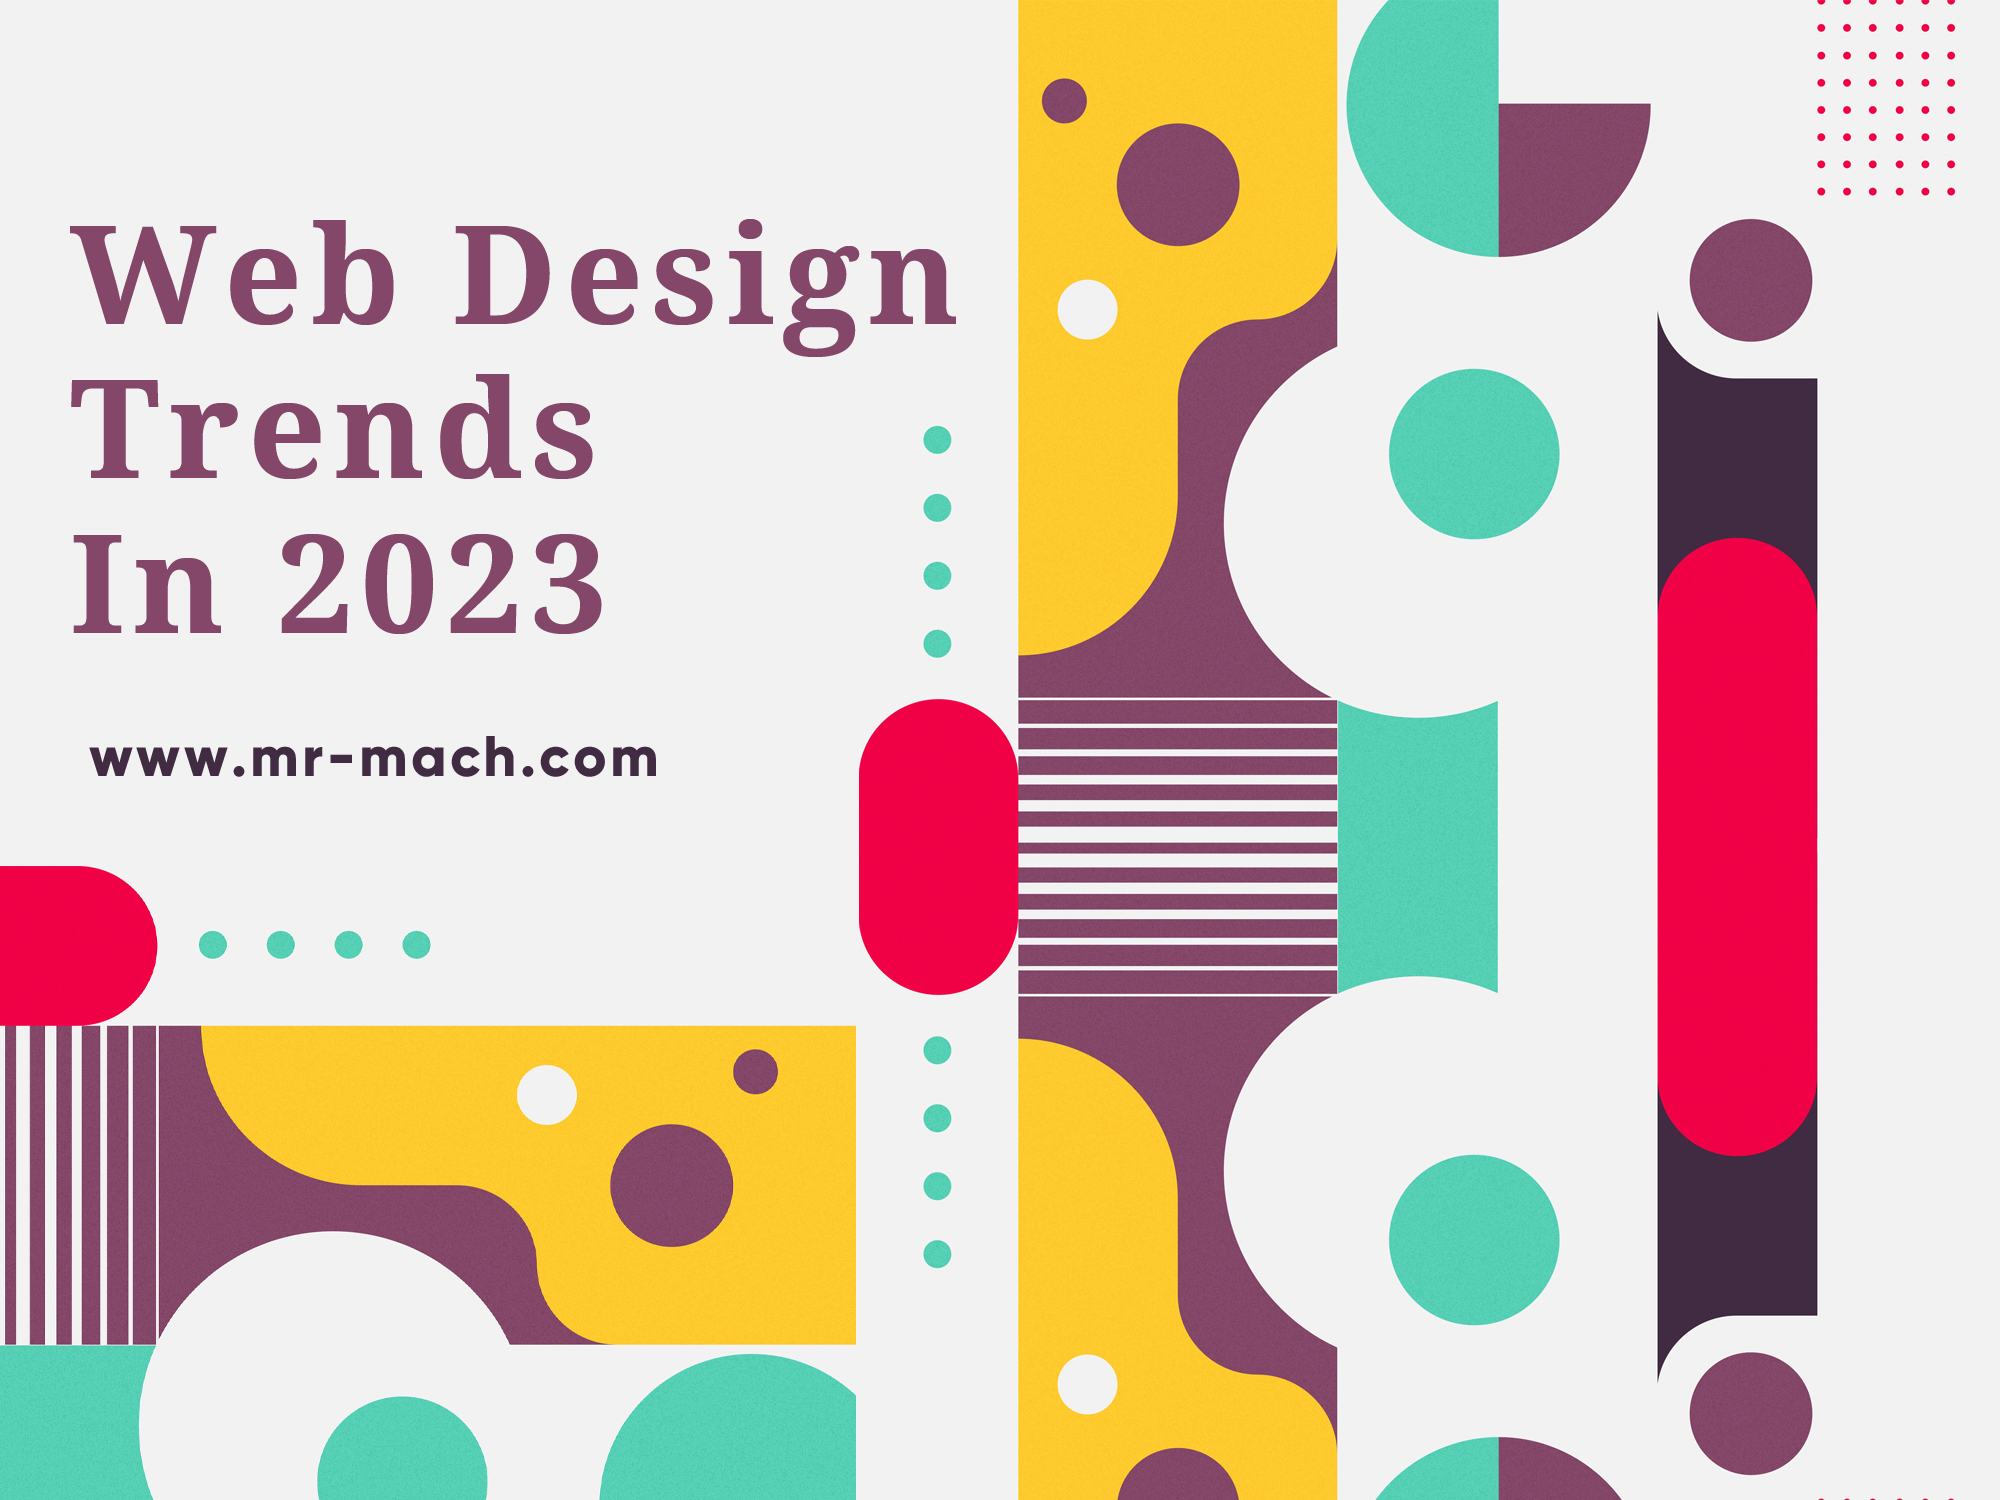 Trending Web Design Layouts, Elements and Color Schemes for 2023